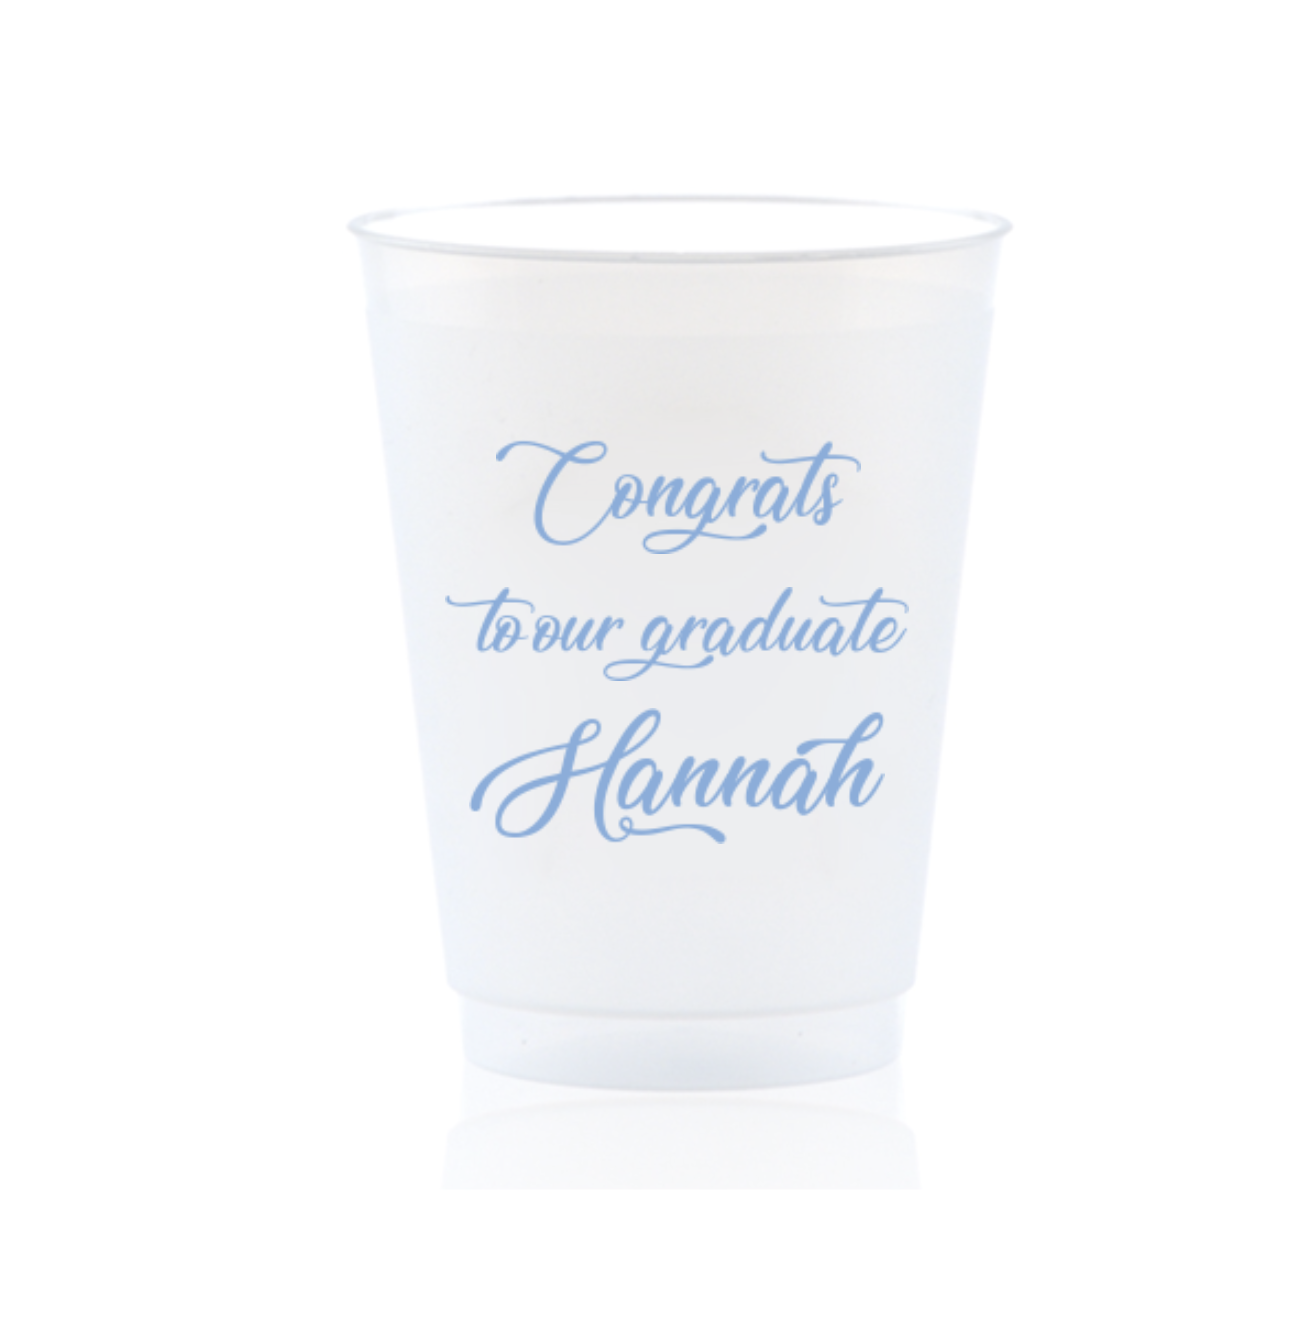 Custom Shatterproof Cups - Congrats to our Graduate